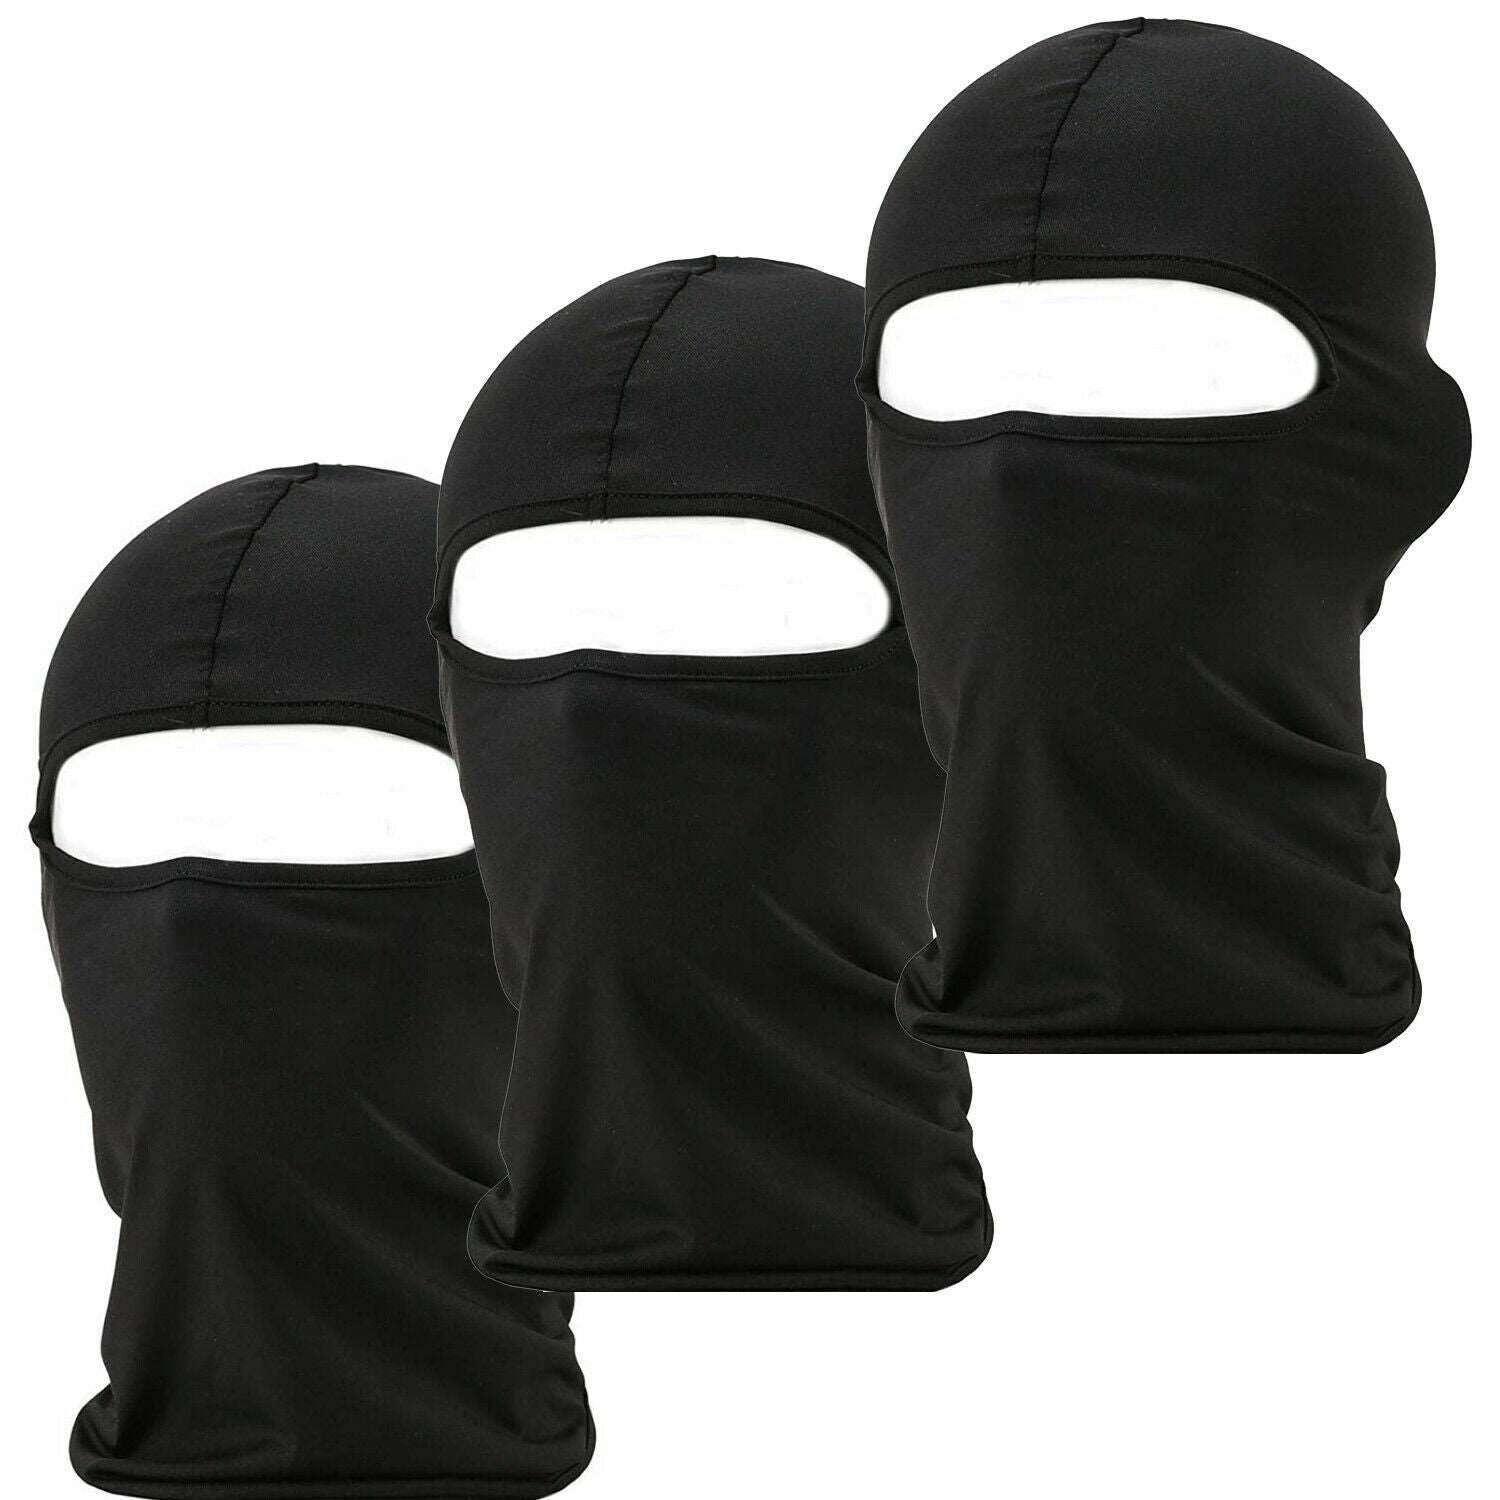 Breathable and Moisture-Wicking Premium Ski Mask Collection